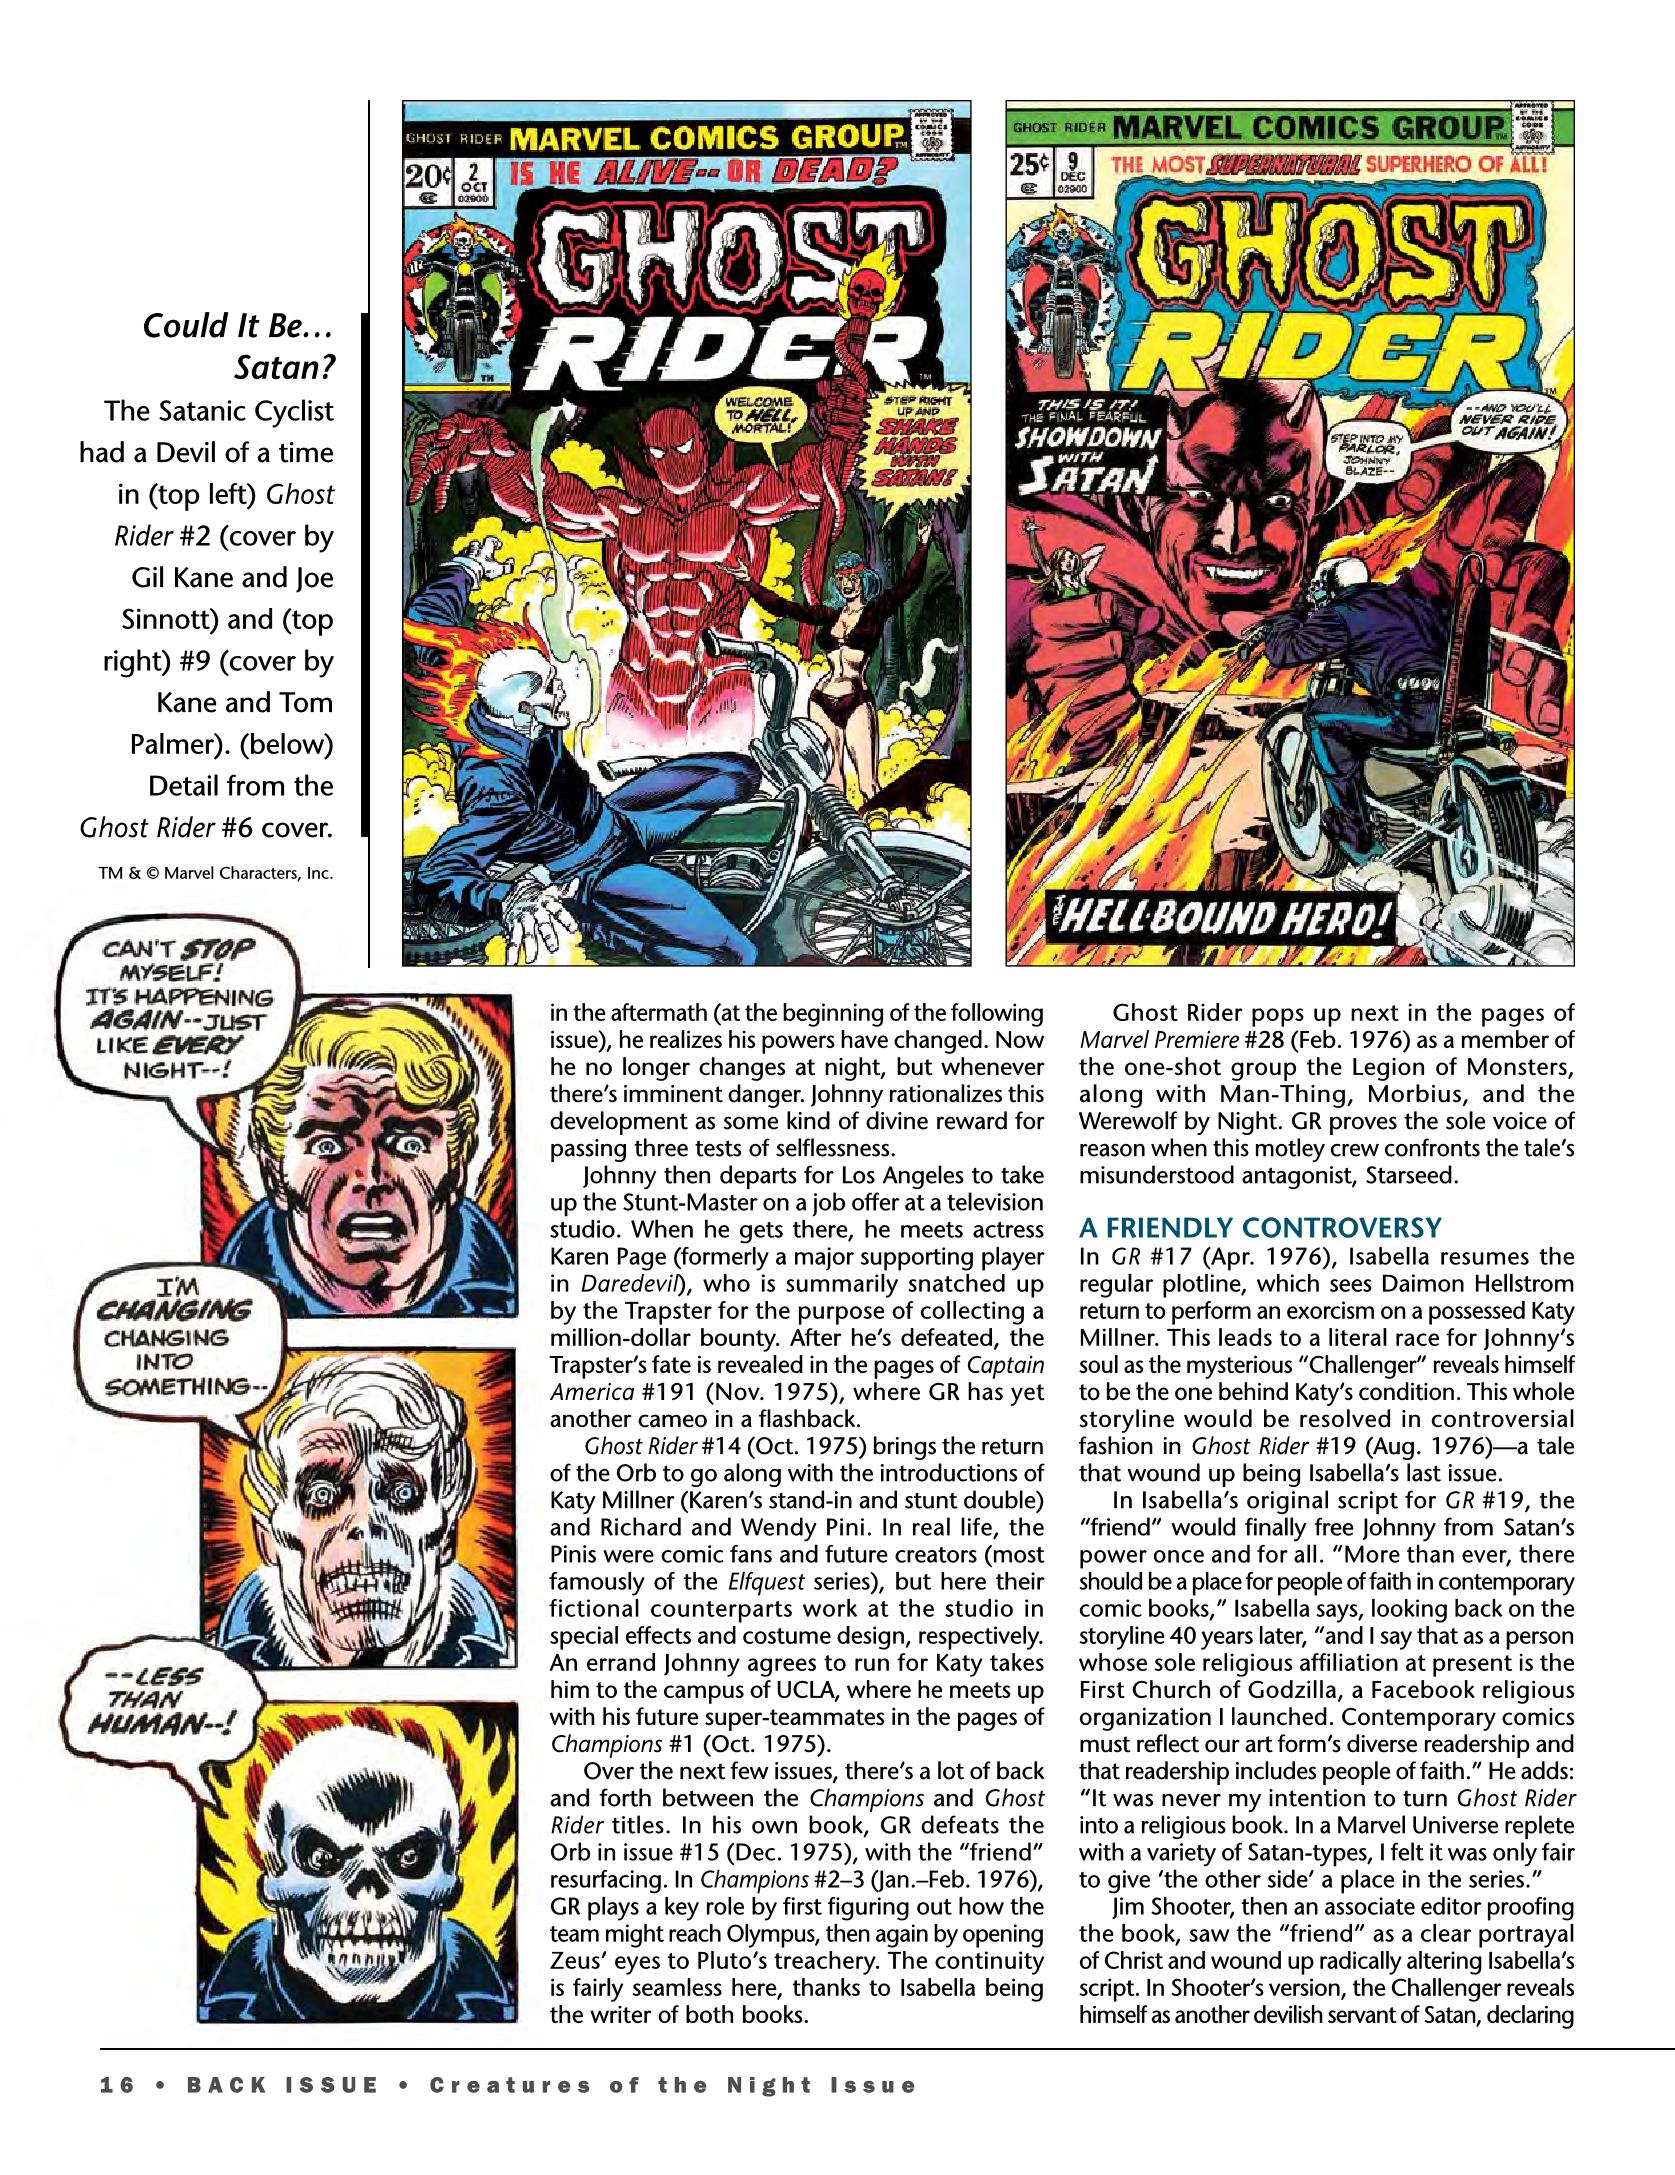 Read online Back Issue comic -  Issue #95 - 10